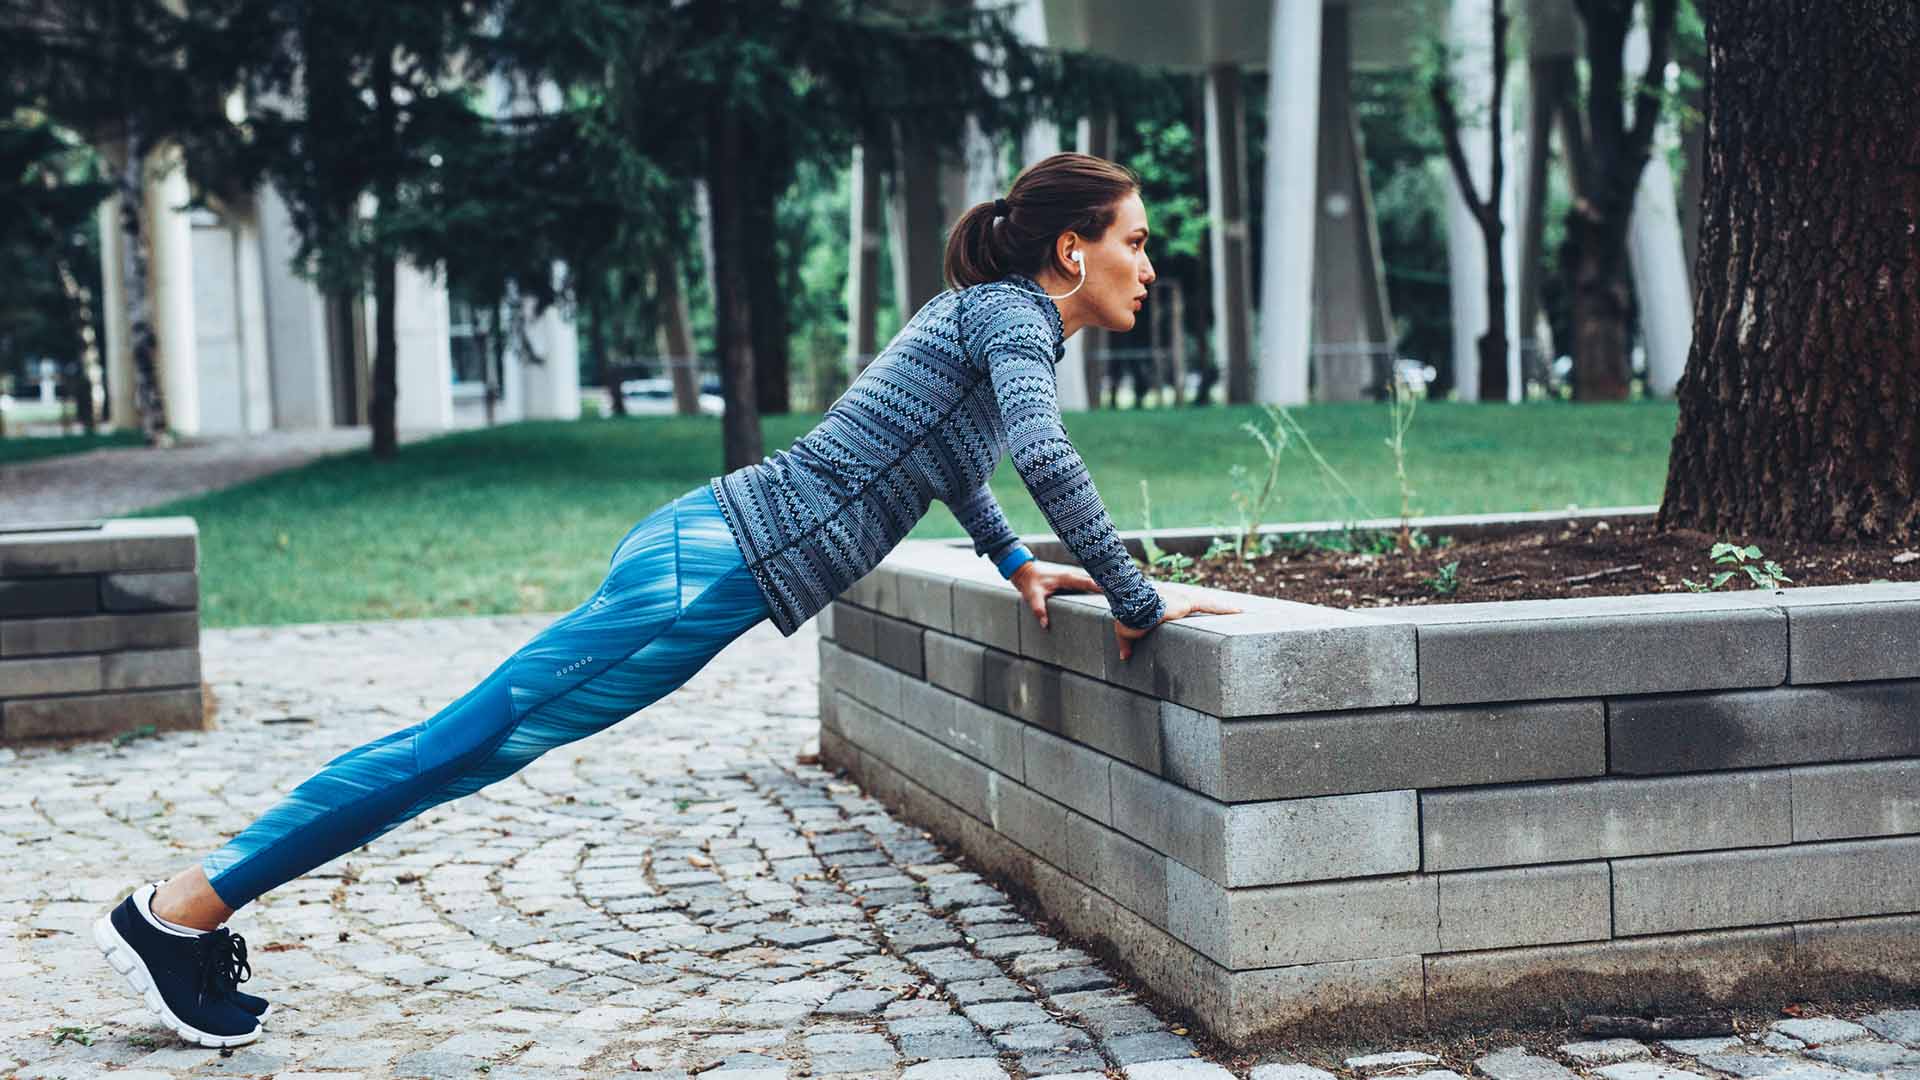 Woman doing pushups outdoor in the city.